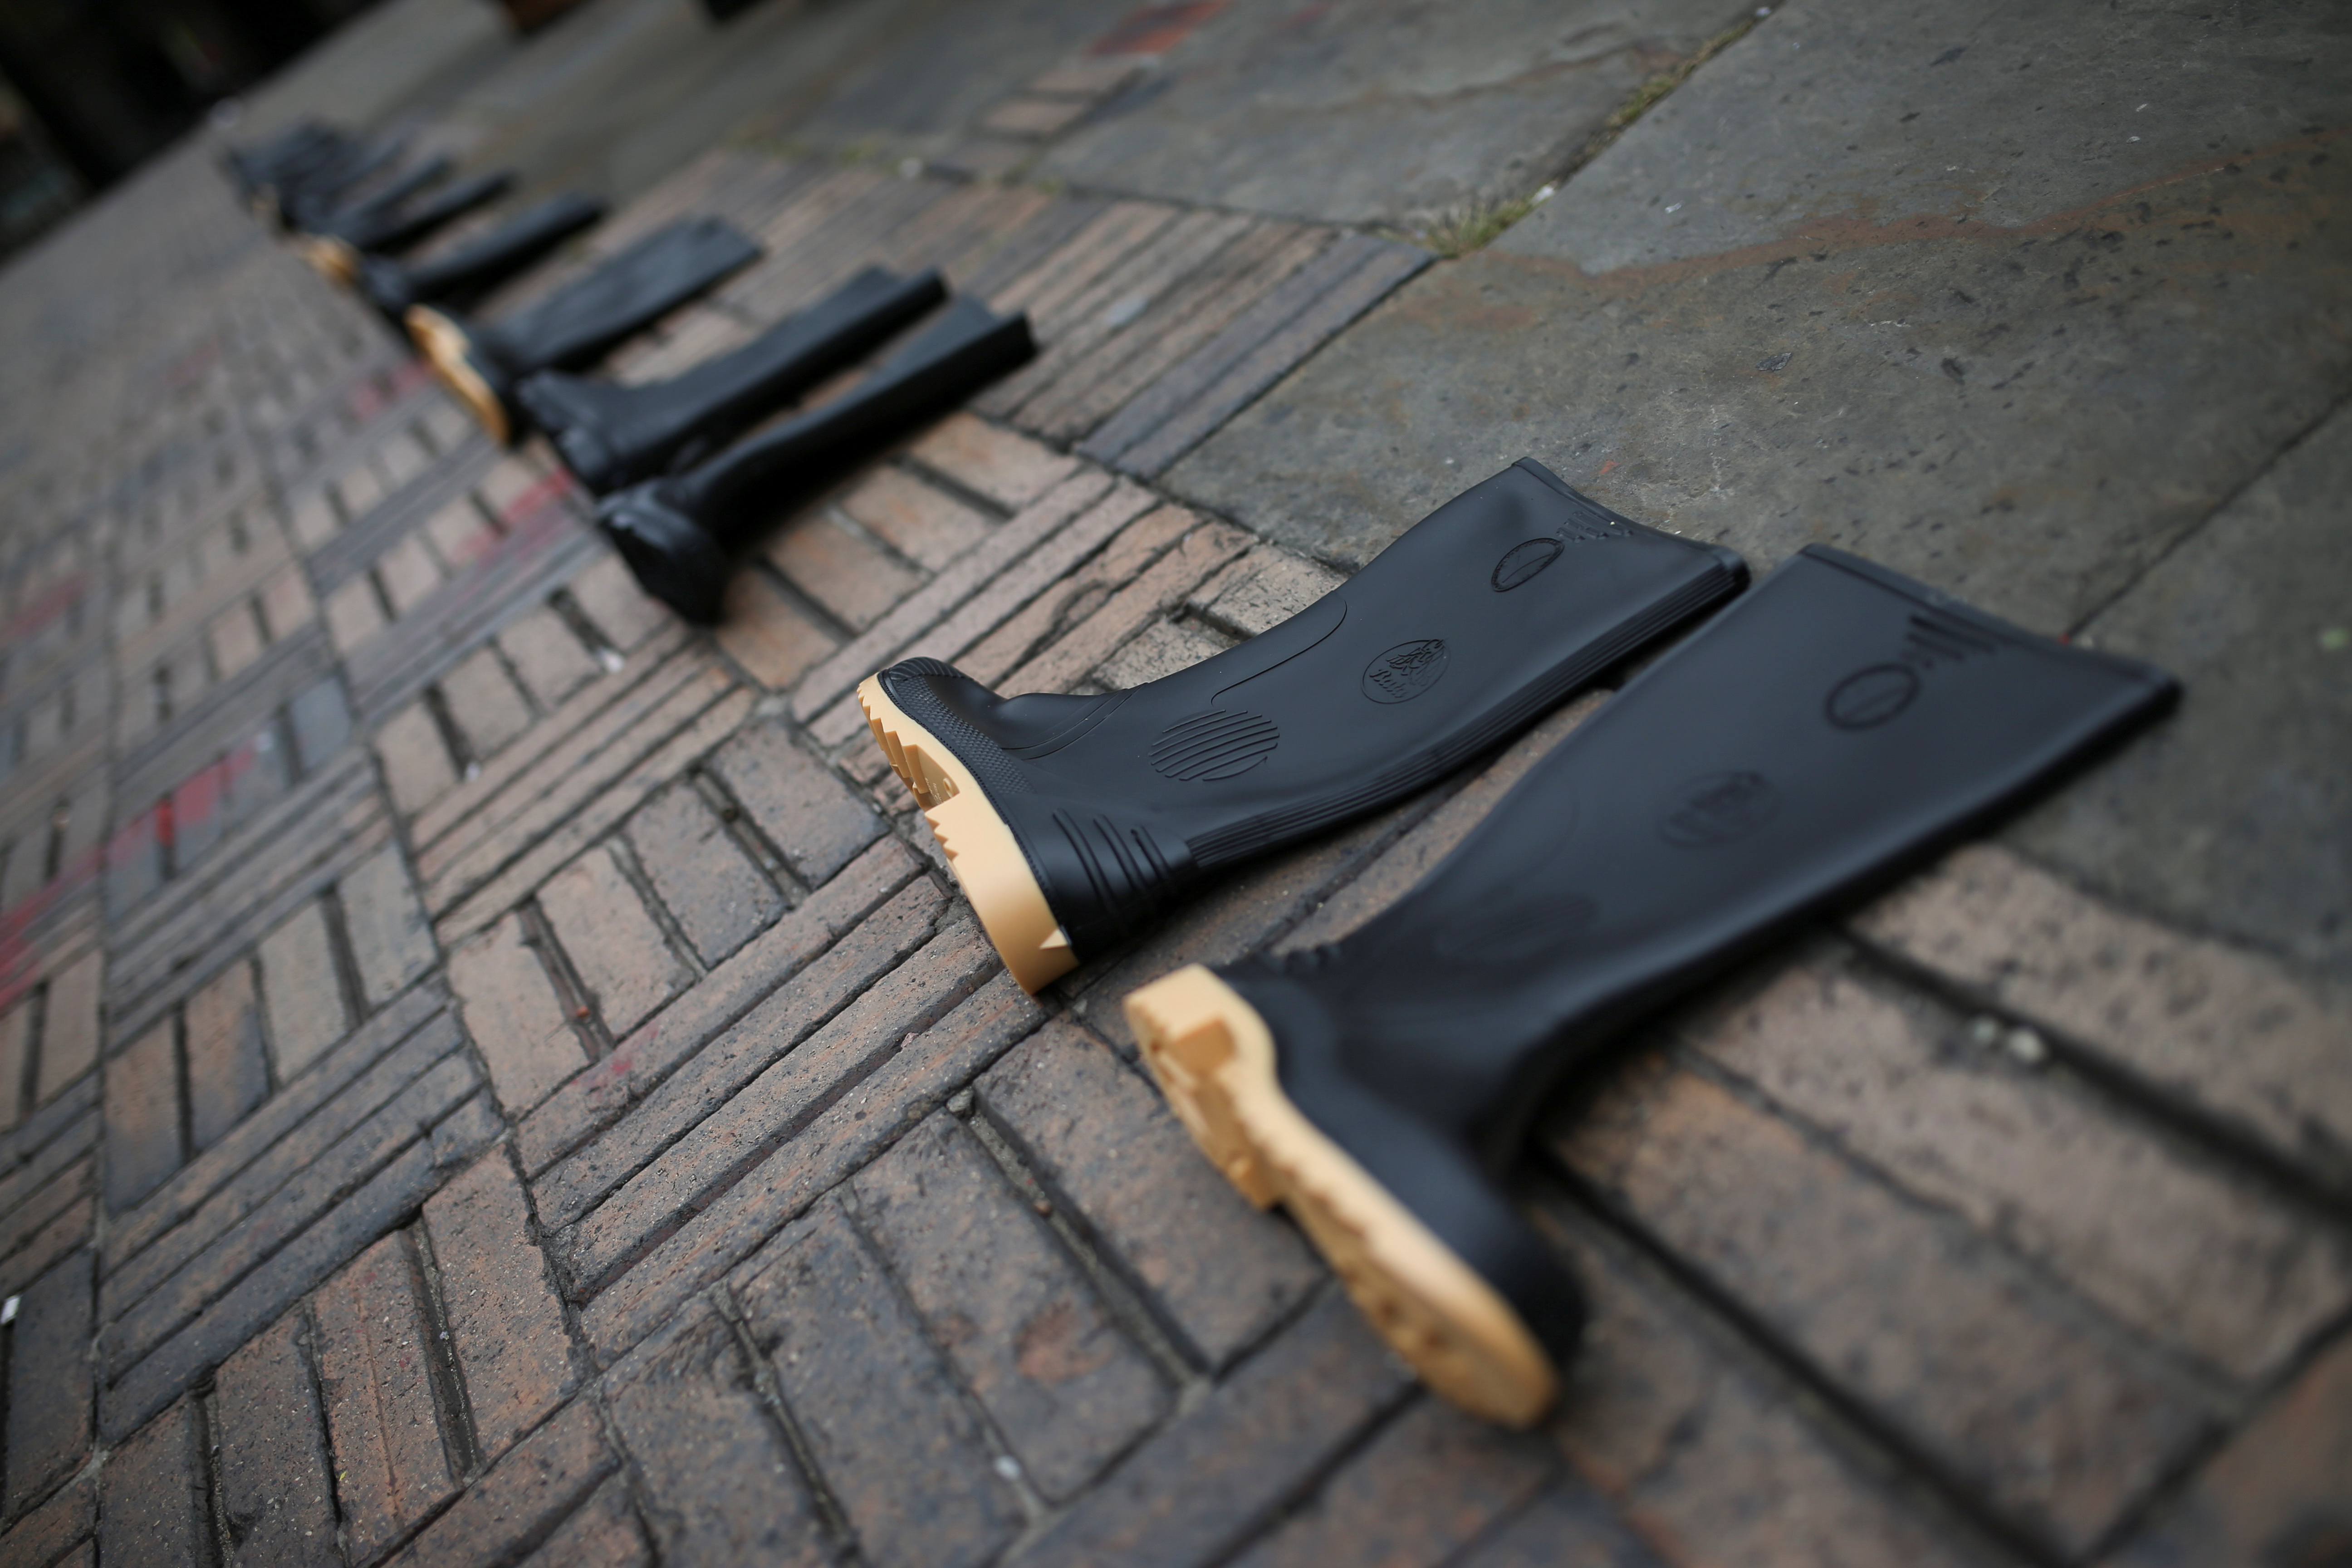 Rubber boots are seen in the Plaza de Bolivar during a symbolic protest to commemorate the more than 6,400 people who were reportedly killed by the army in 'false positive' cases during the war against FARC rebels, in Bogota, Colombia August 30, 2021. REUTERS/Luisa Gonzalez